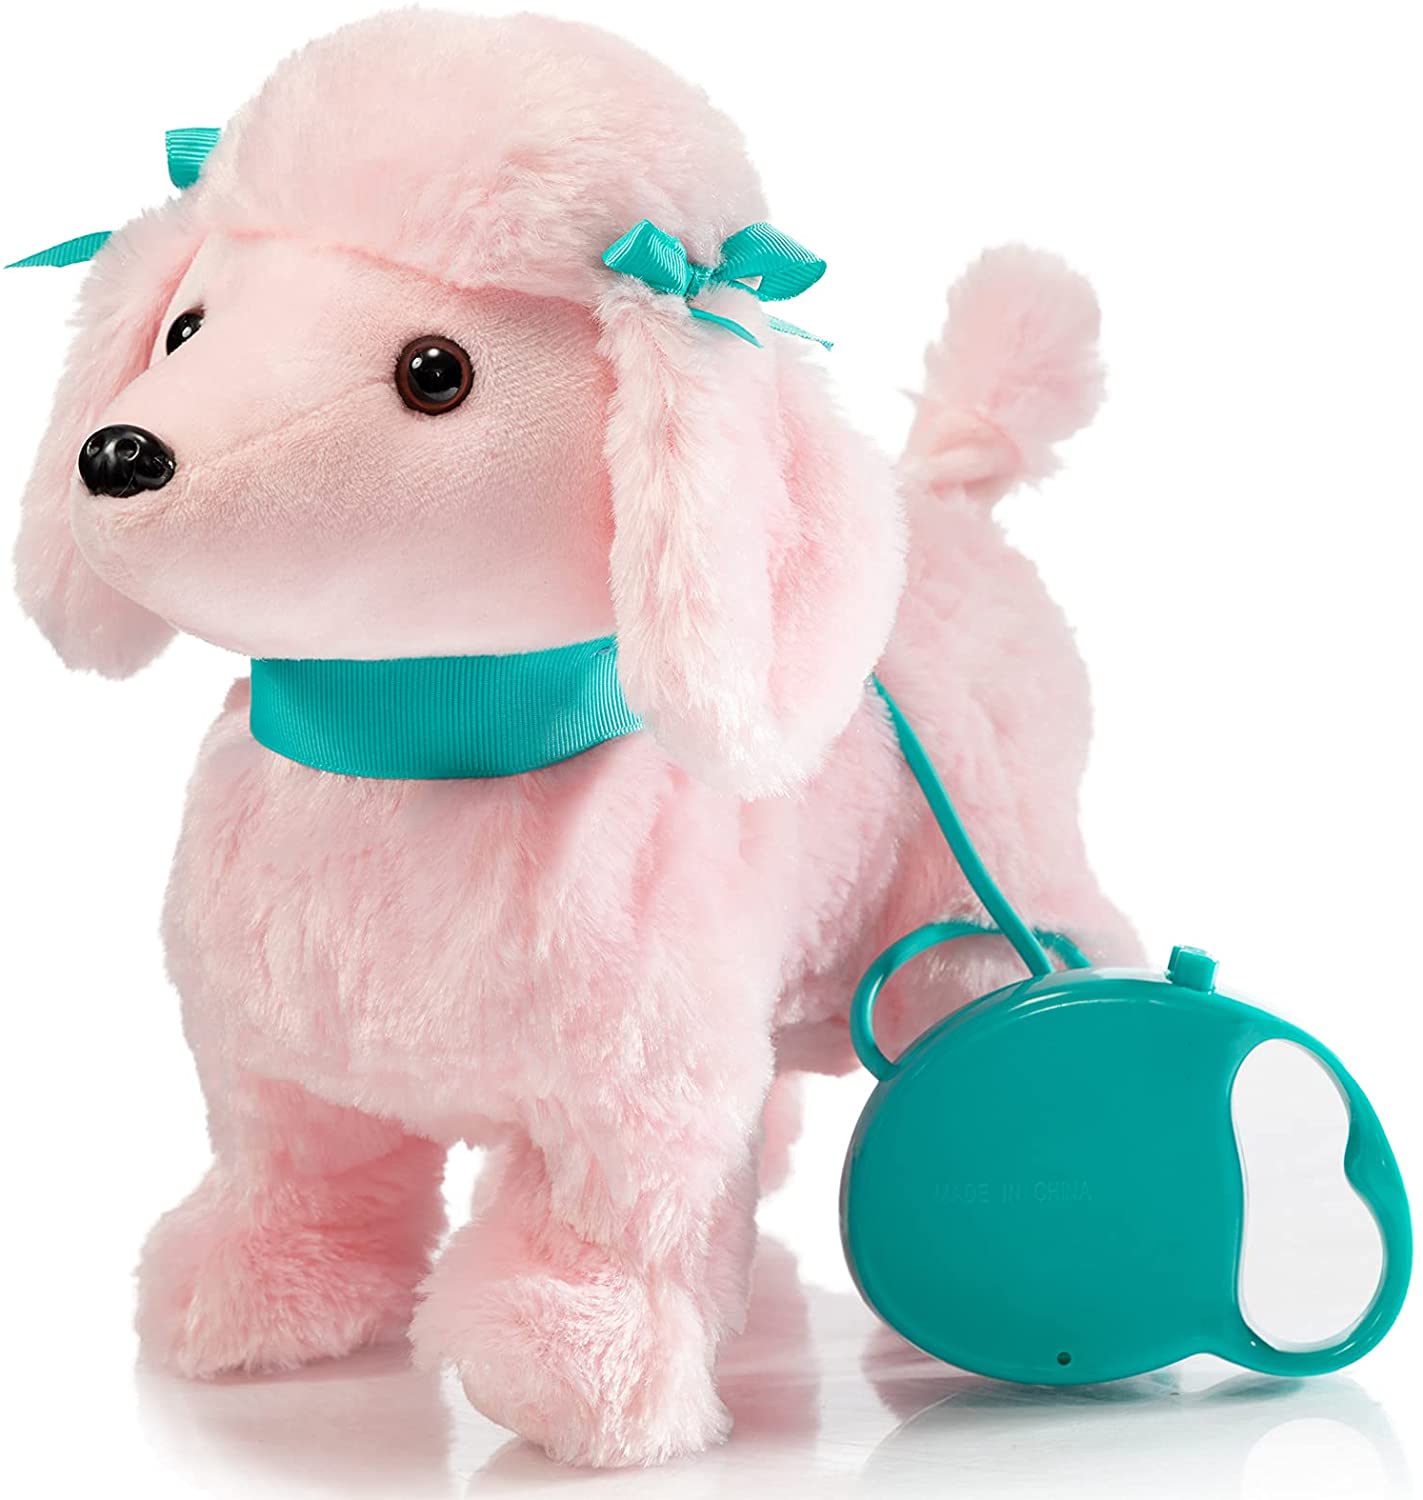 BLUE WALKING POODLE DOG WITH LEASH battery operated toy dancing dog novelty NEW 